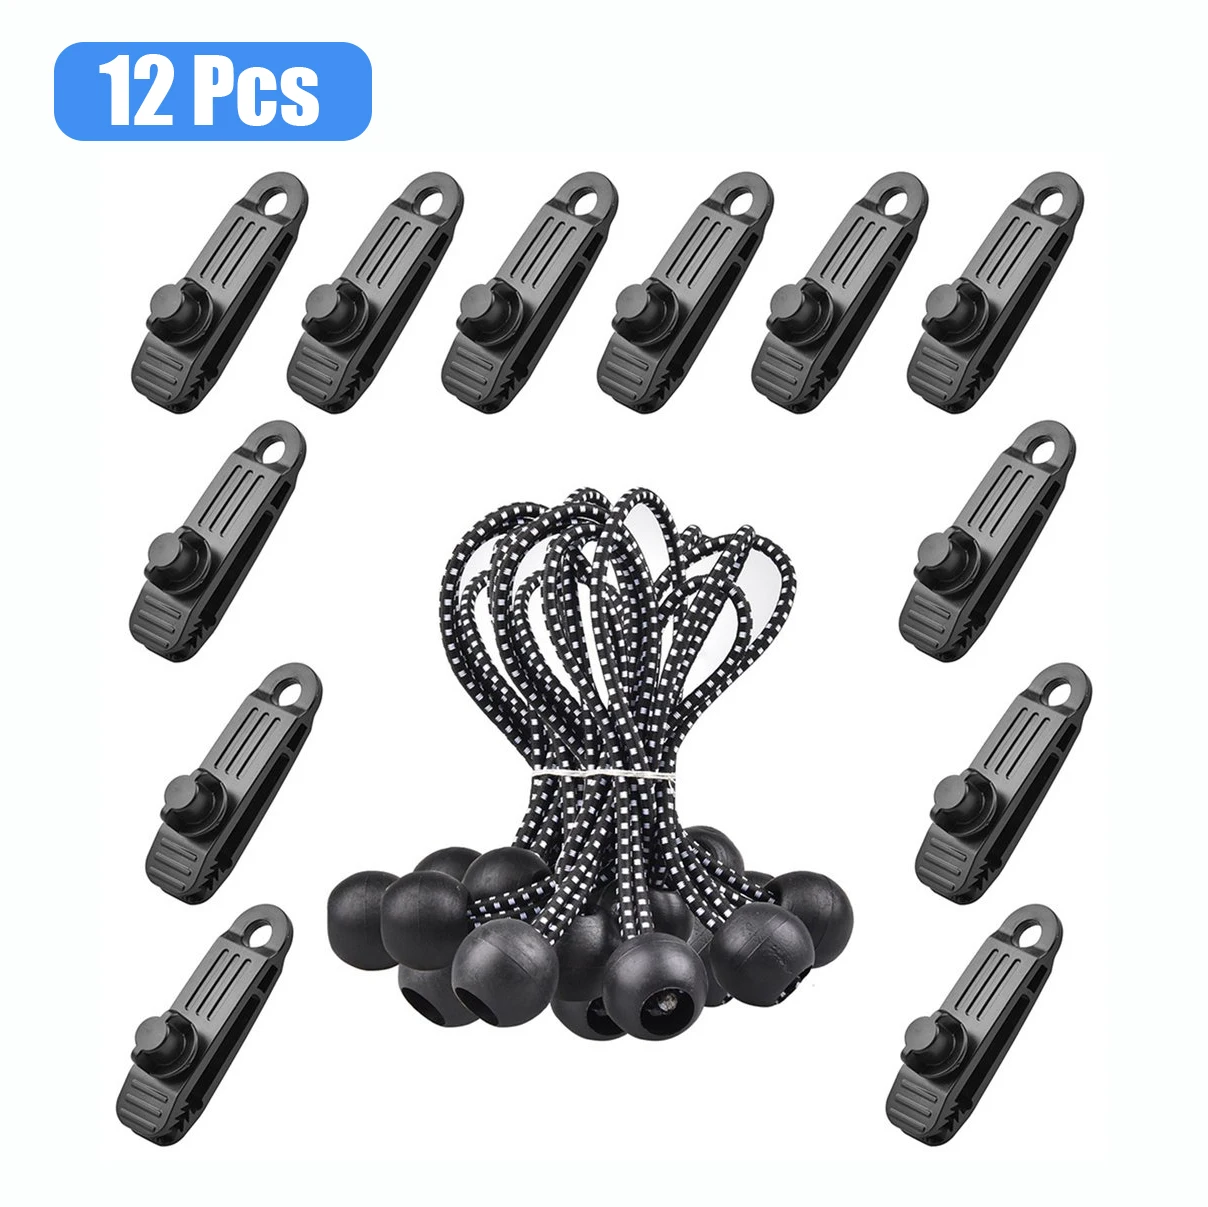 

12 PCS Tent Clip 20PCS Rope Lock Grip Tarp Clamps Awning Cord Clip Urgent Snap Fixed Plastic Clip For Outdoor Tent Cover Clamp